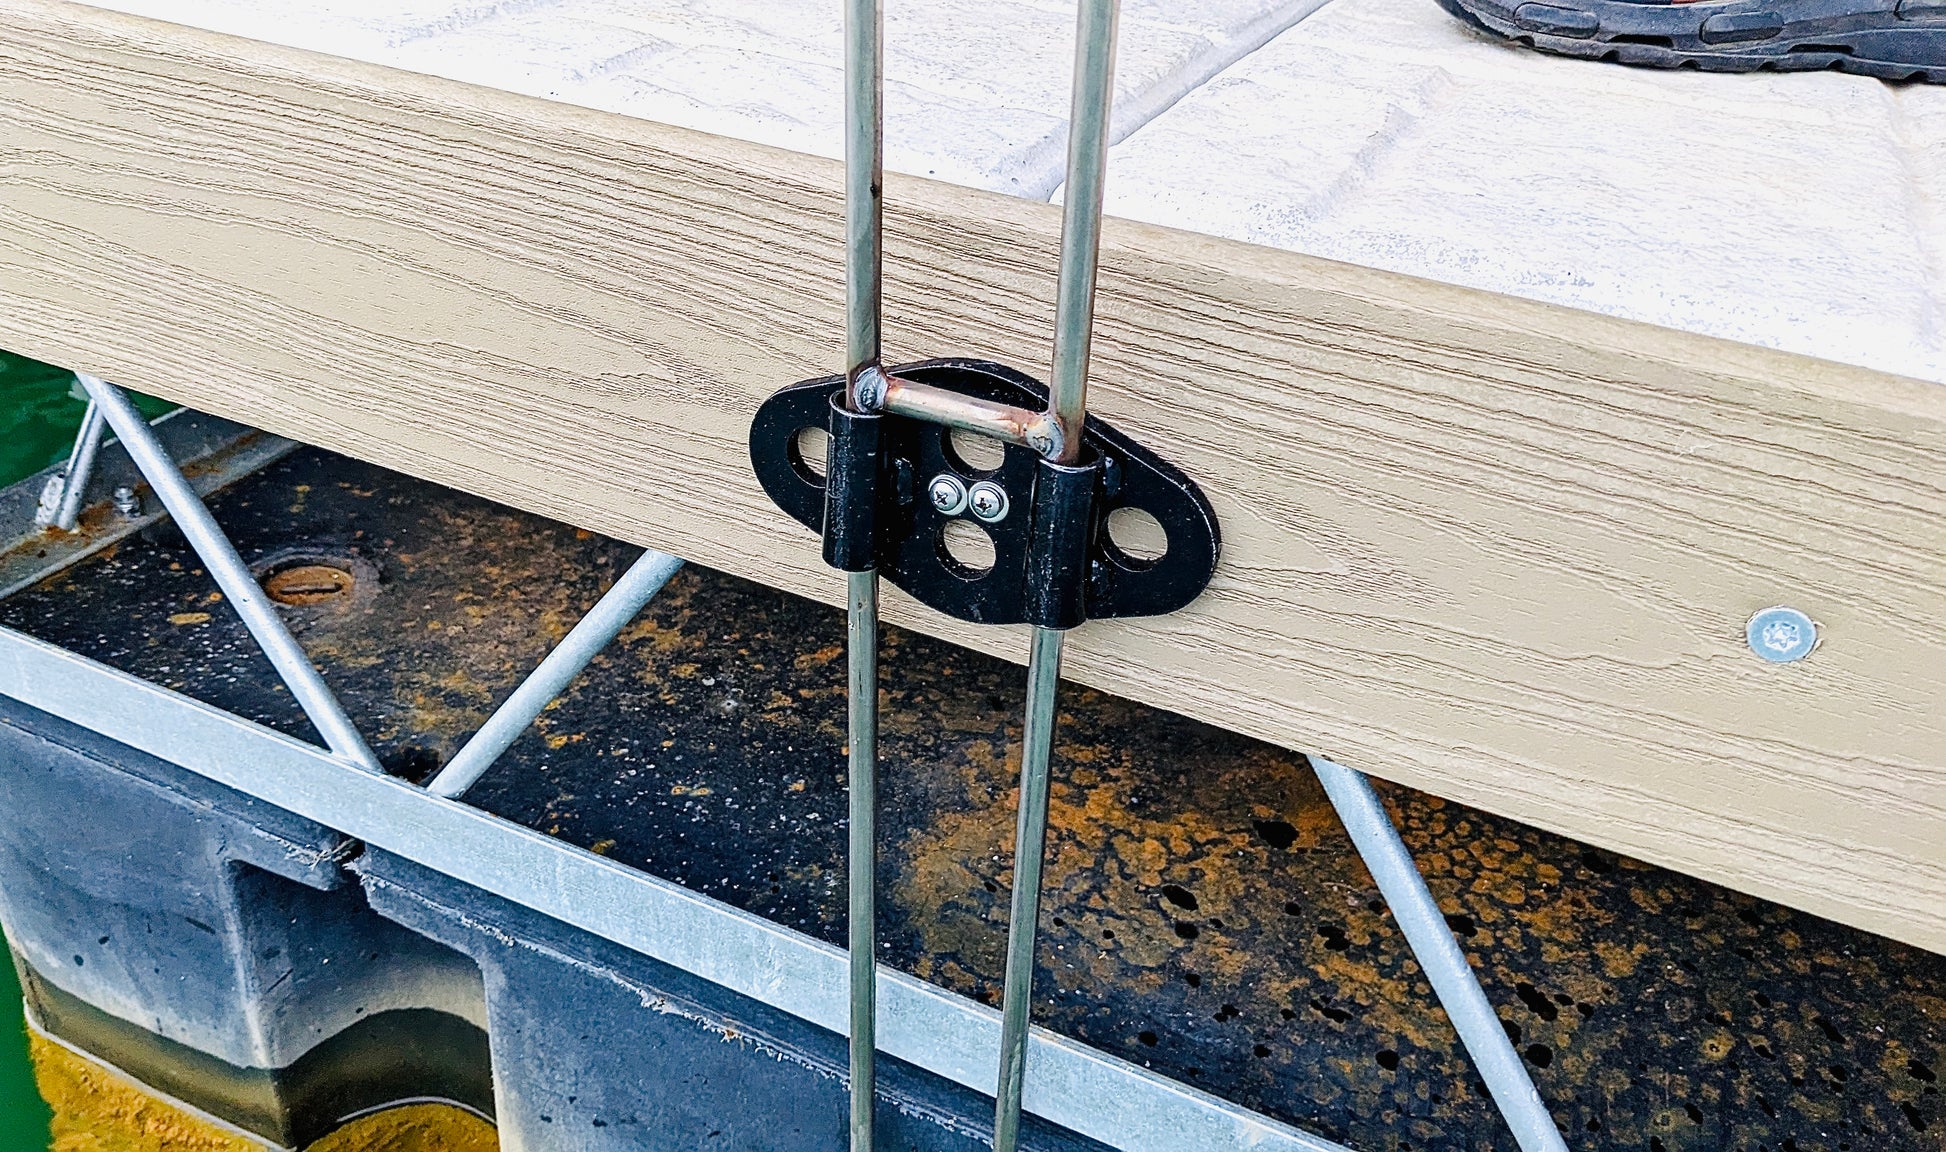 Angle of fishing rod holder for dock - The Great Outdoors Stack